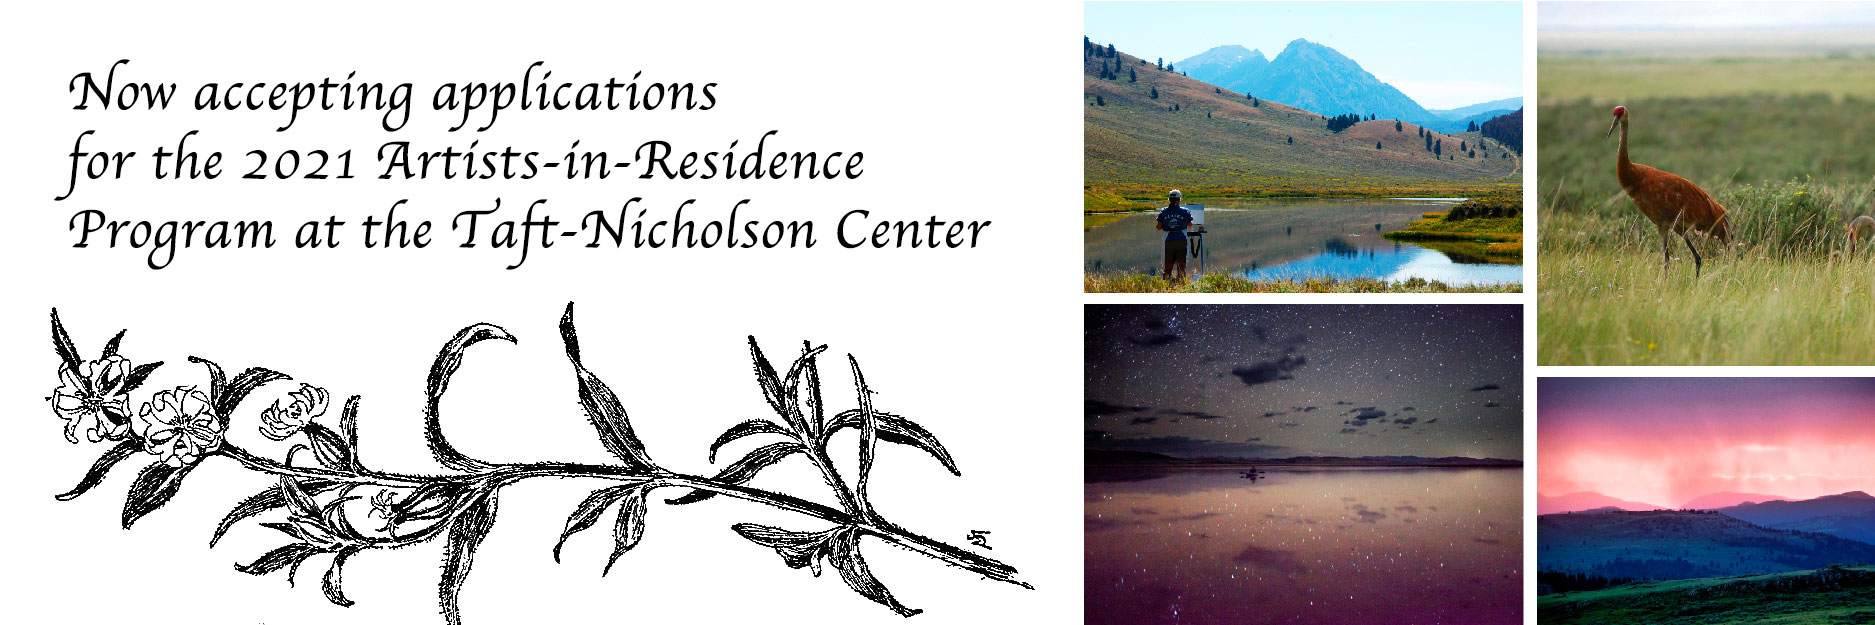 Now Accepting Applications for the 2021 Artists-in-Residence Program